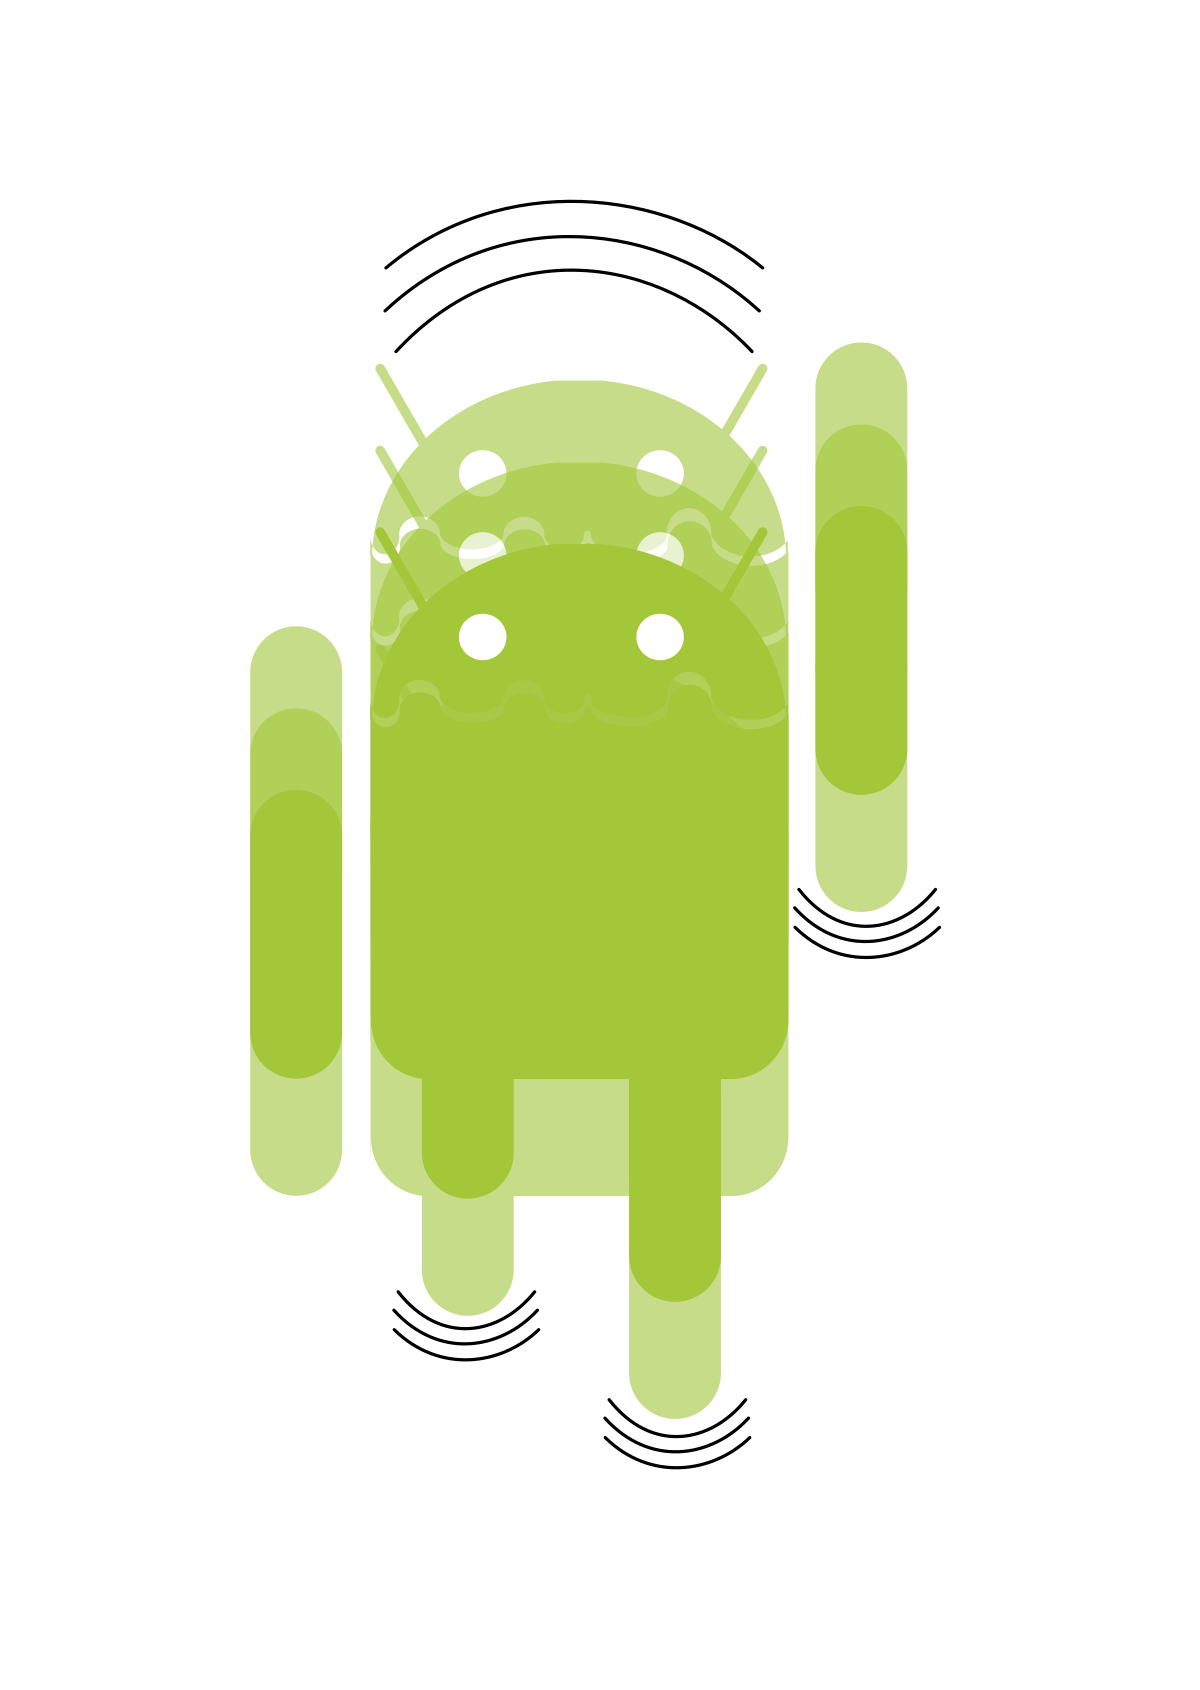 File:Android verticalVibration.svg - Wikimedia Commons